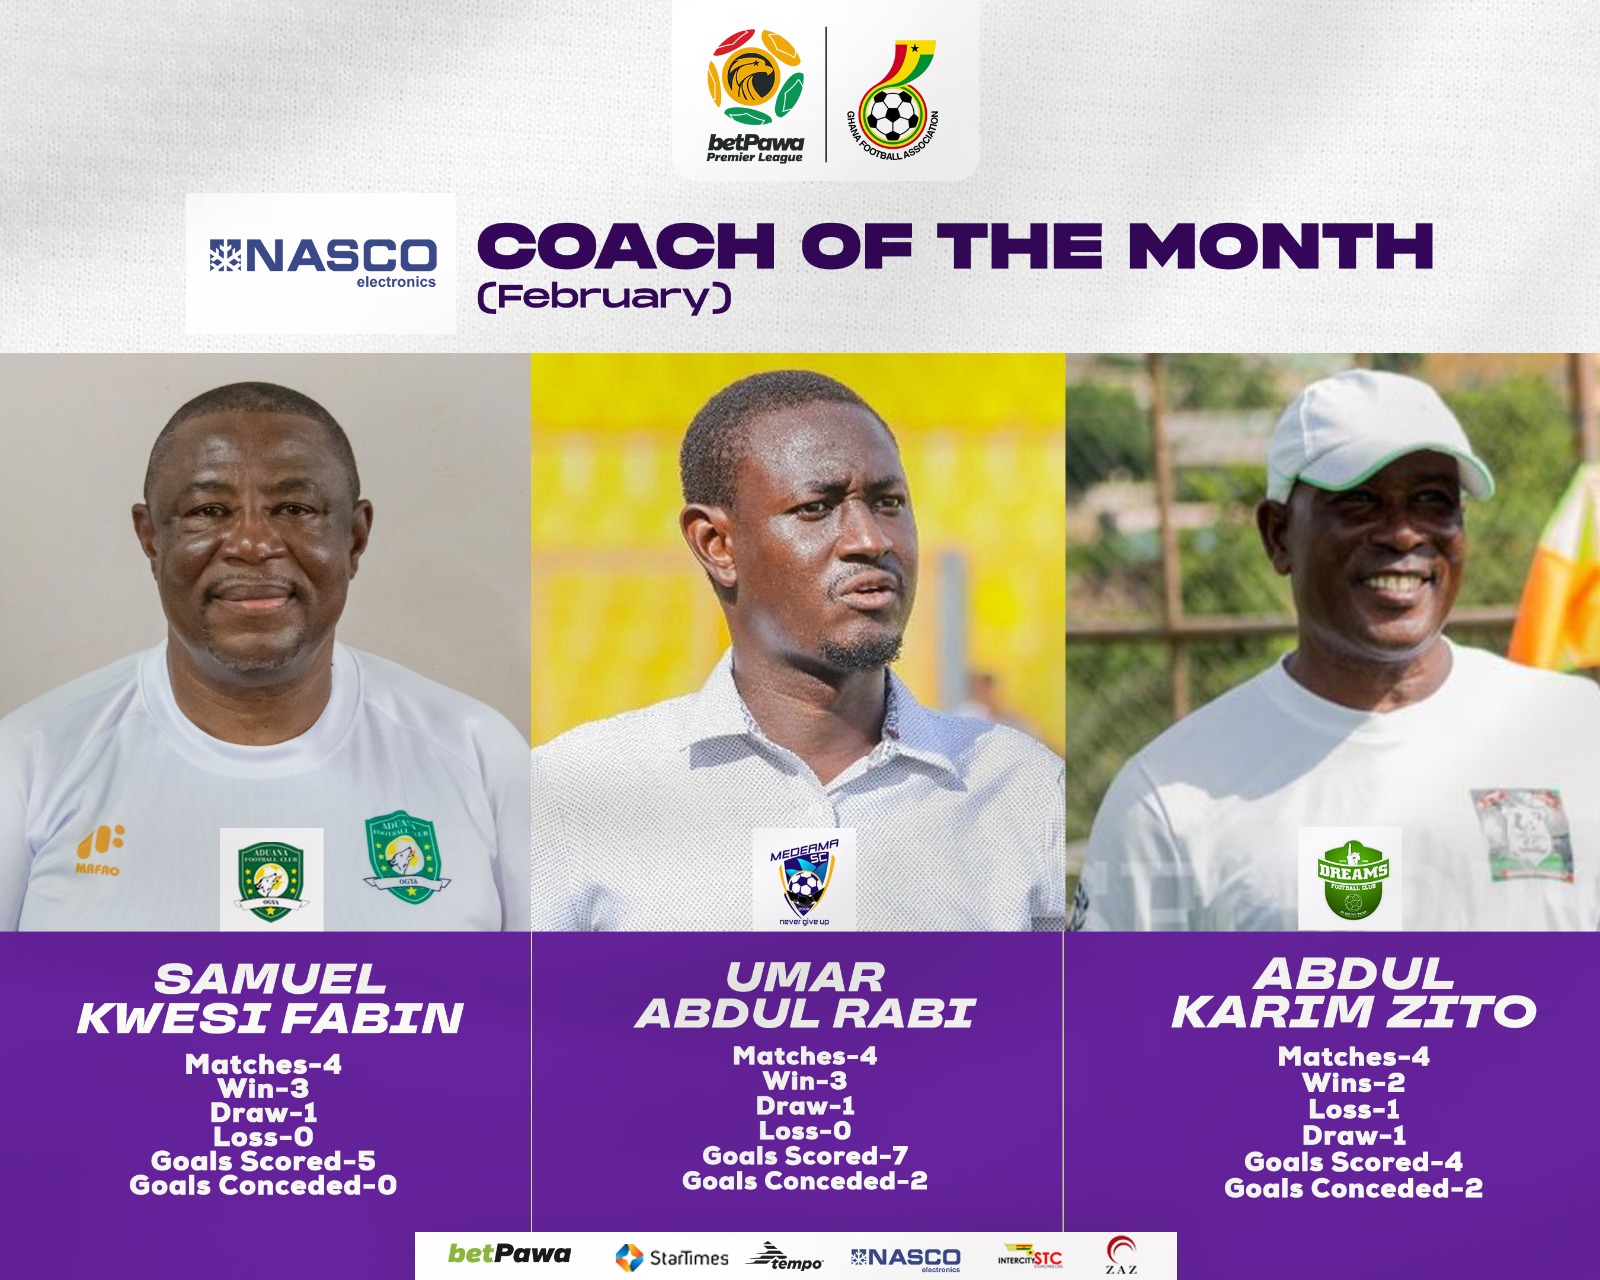 Three Coaches shortlisted for NASCO Coach of the Month for February